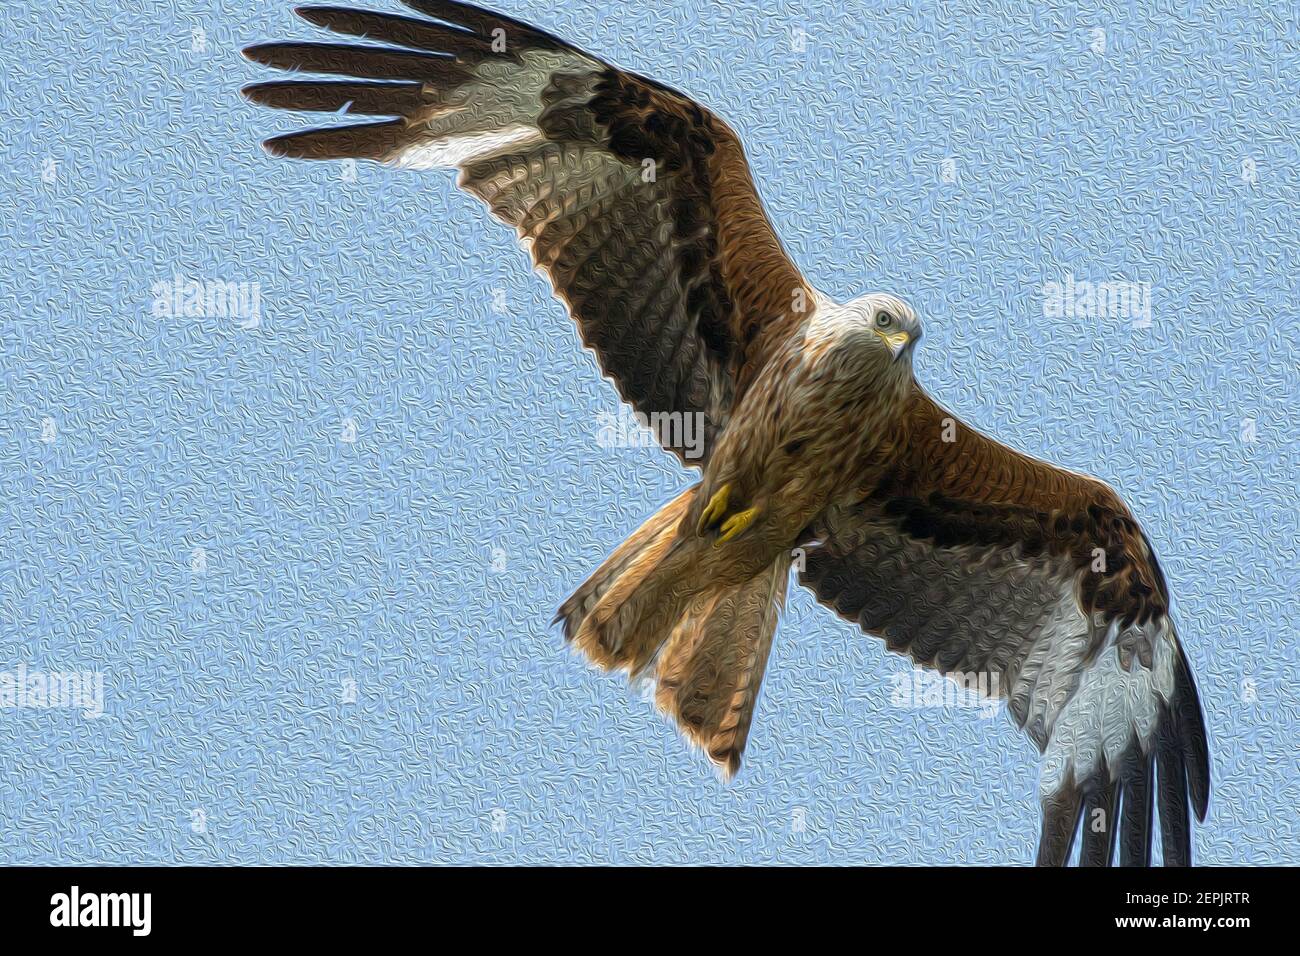 Stunning Red Kite soaring in mid-air, Harewood, West Yorkshire, England, UK - digital watercolour effect. Stock Photo